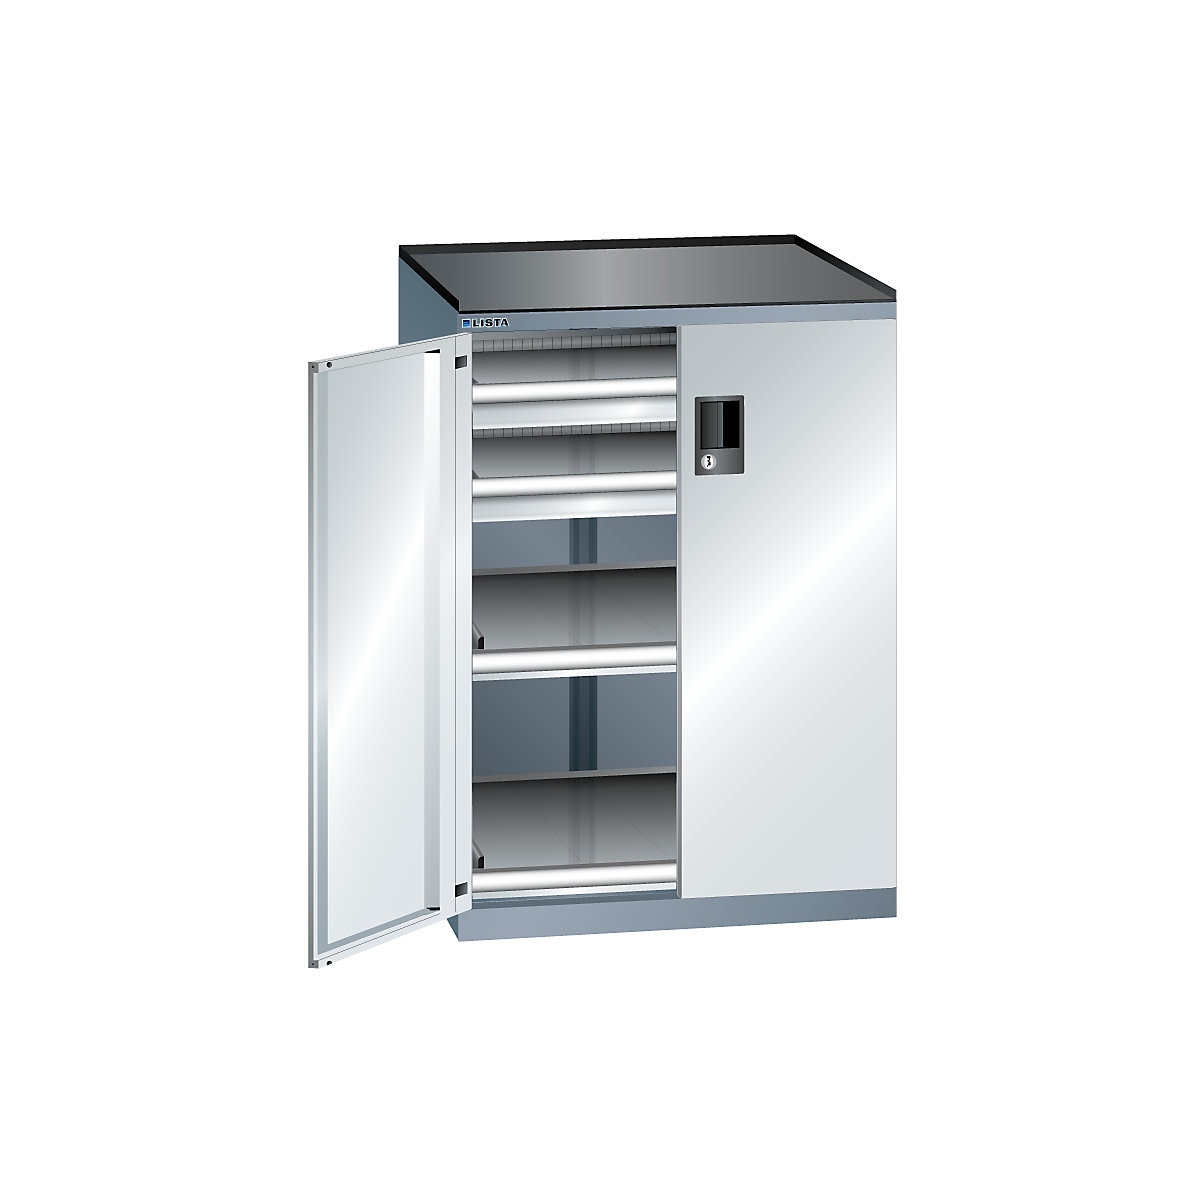 Drawer cupboard with hinged doors – LISTA